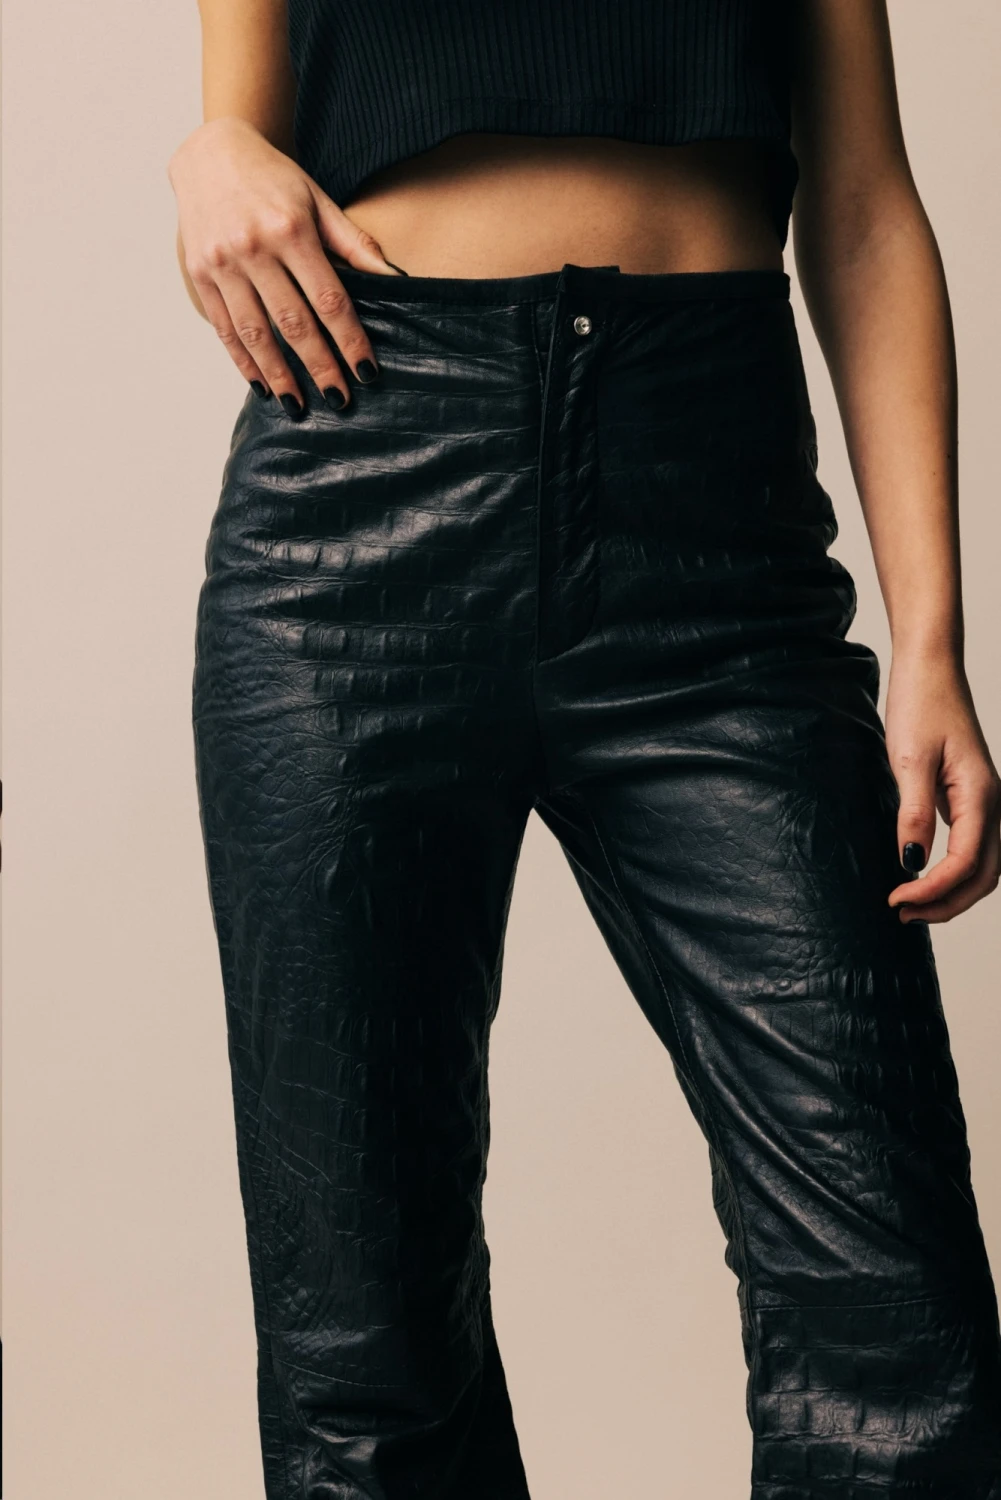 Formal Leather Pants Crocco negro 42